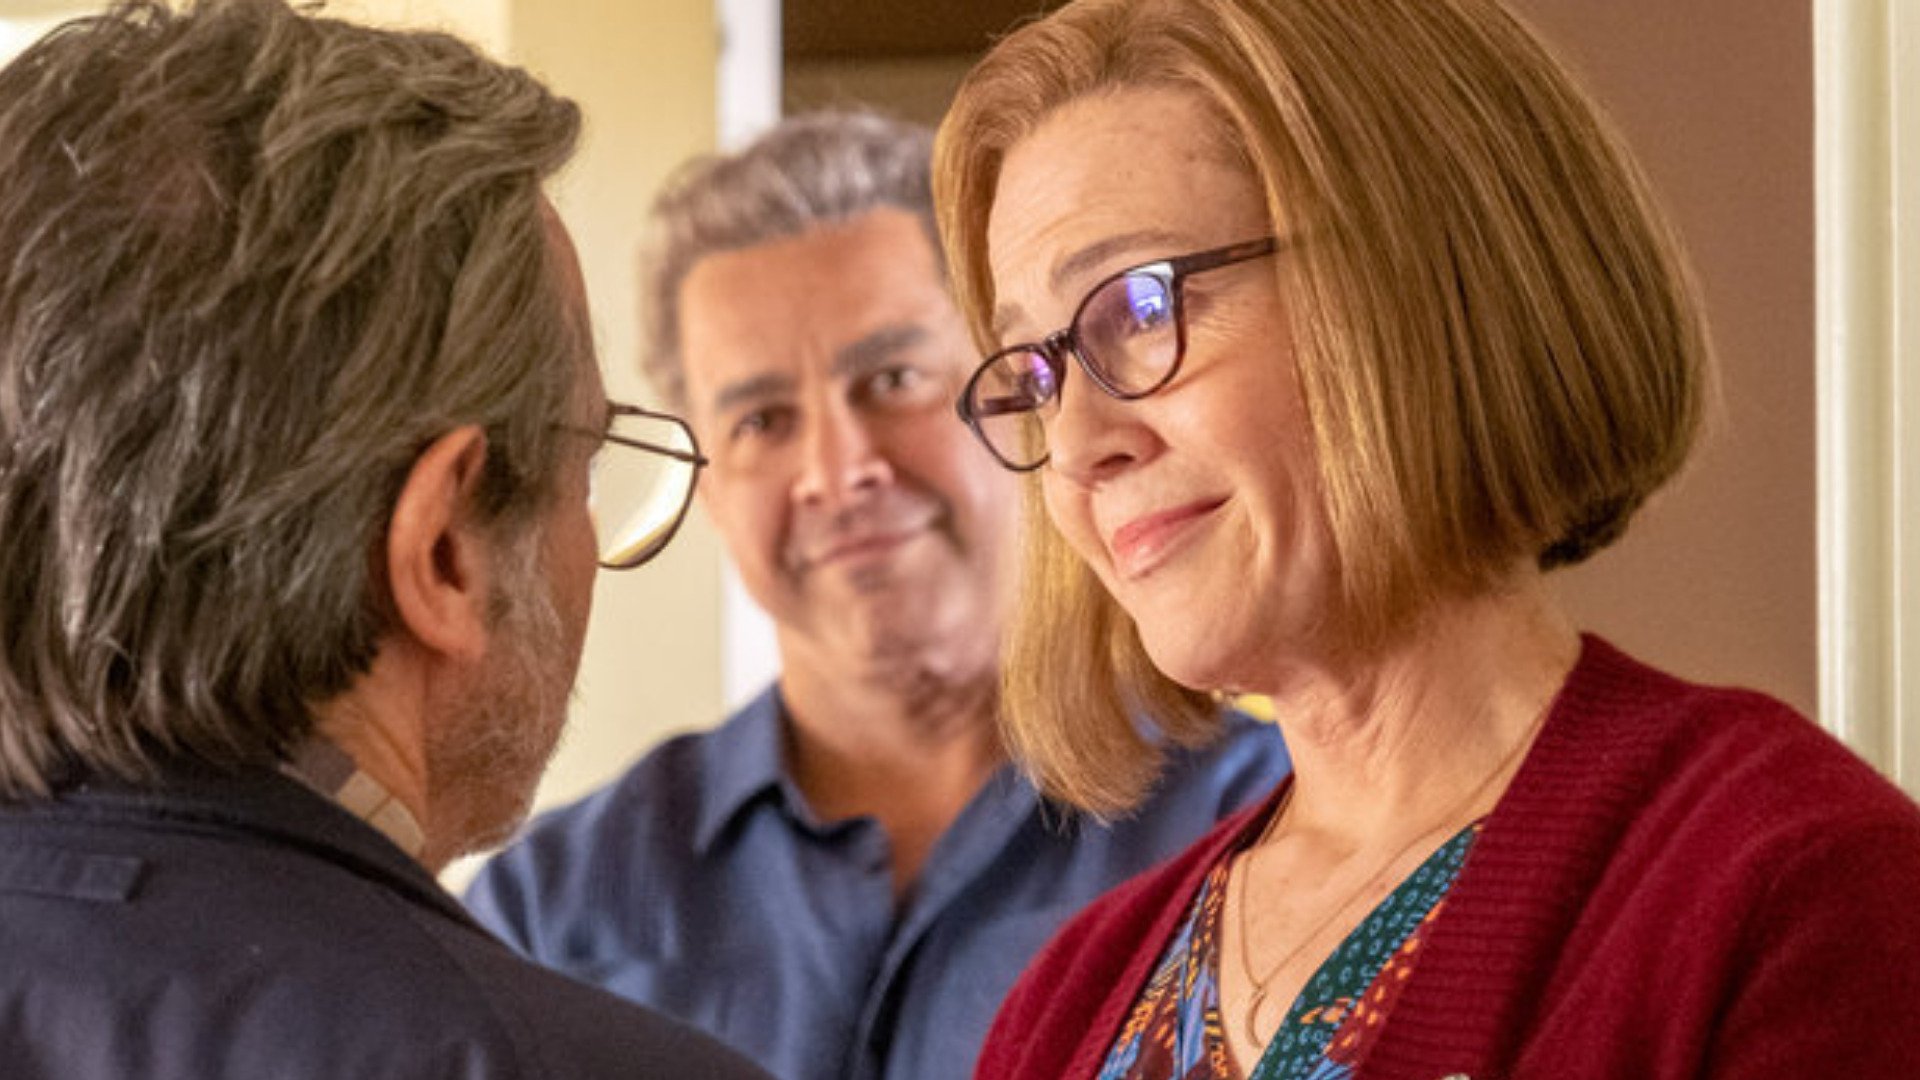 Griffin Dunne as Nicky looks at Mandy Moore as Rebecca and Jon Huertas as Miguel in 'This Is Us' Season 6 Episode 2, 'One Giant Leap'